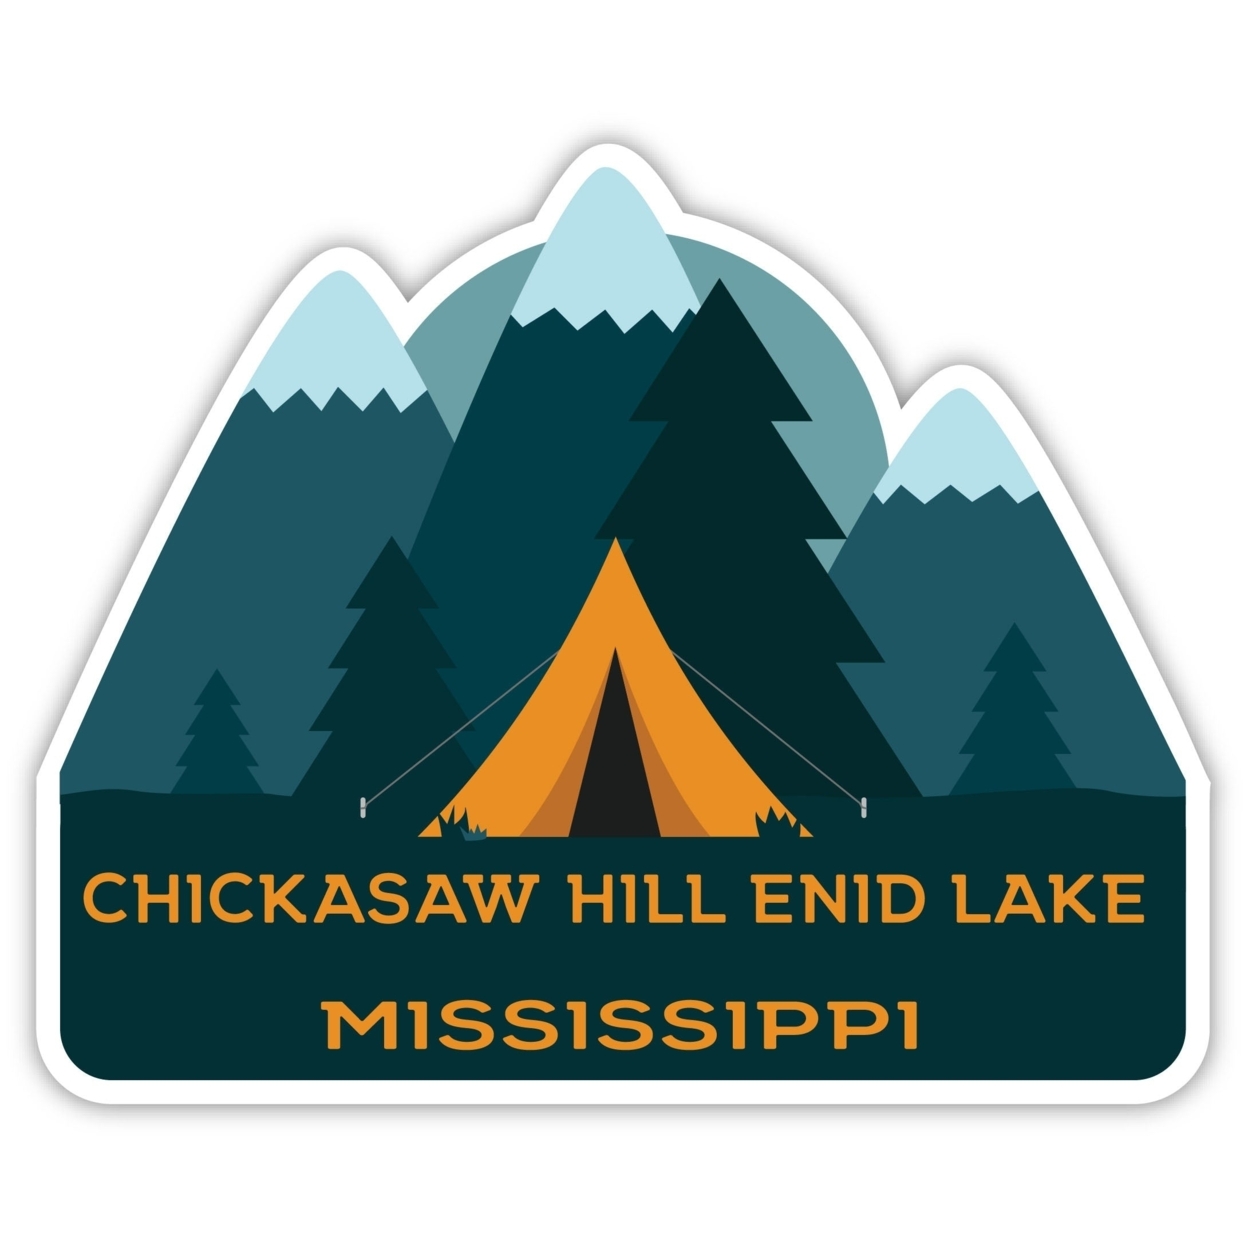 Chickasaw Hill Enid Lake Mississippi Souvenir Decorative Stickers (Choose Theme And Size) - 4-Pack, 8-Inch, Tent